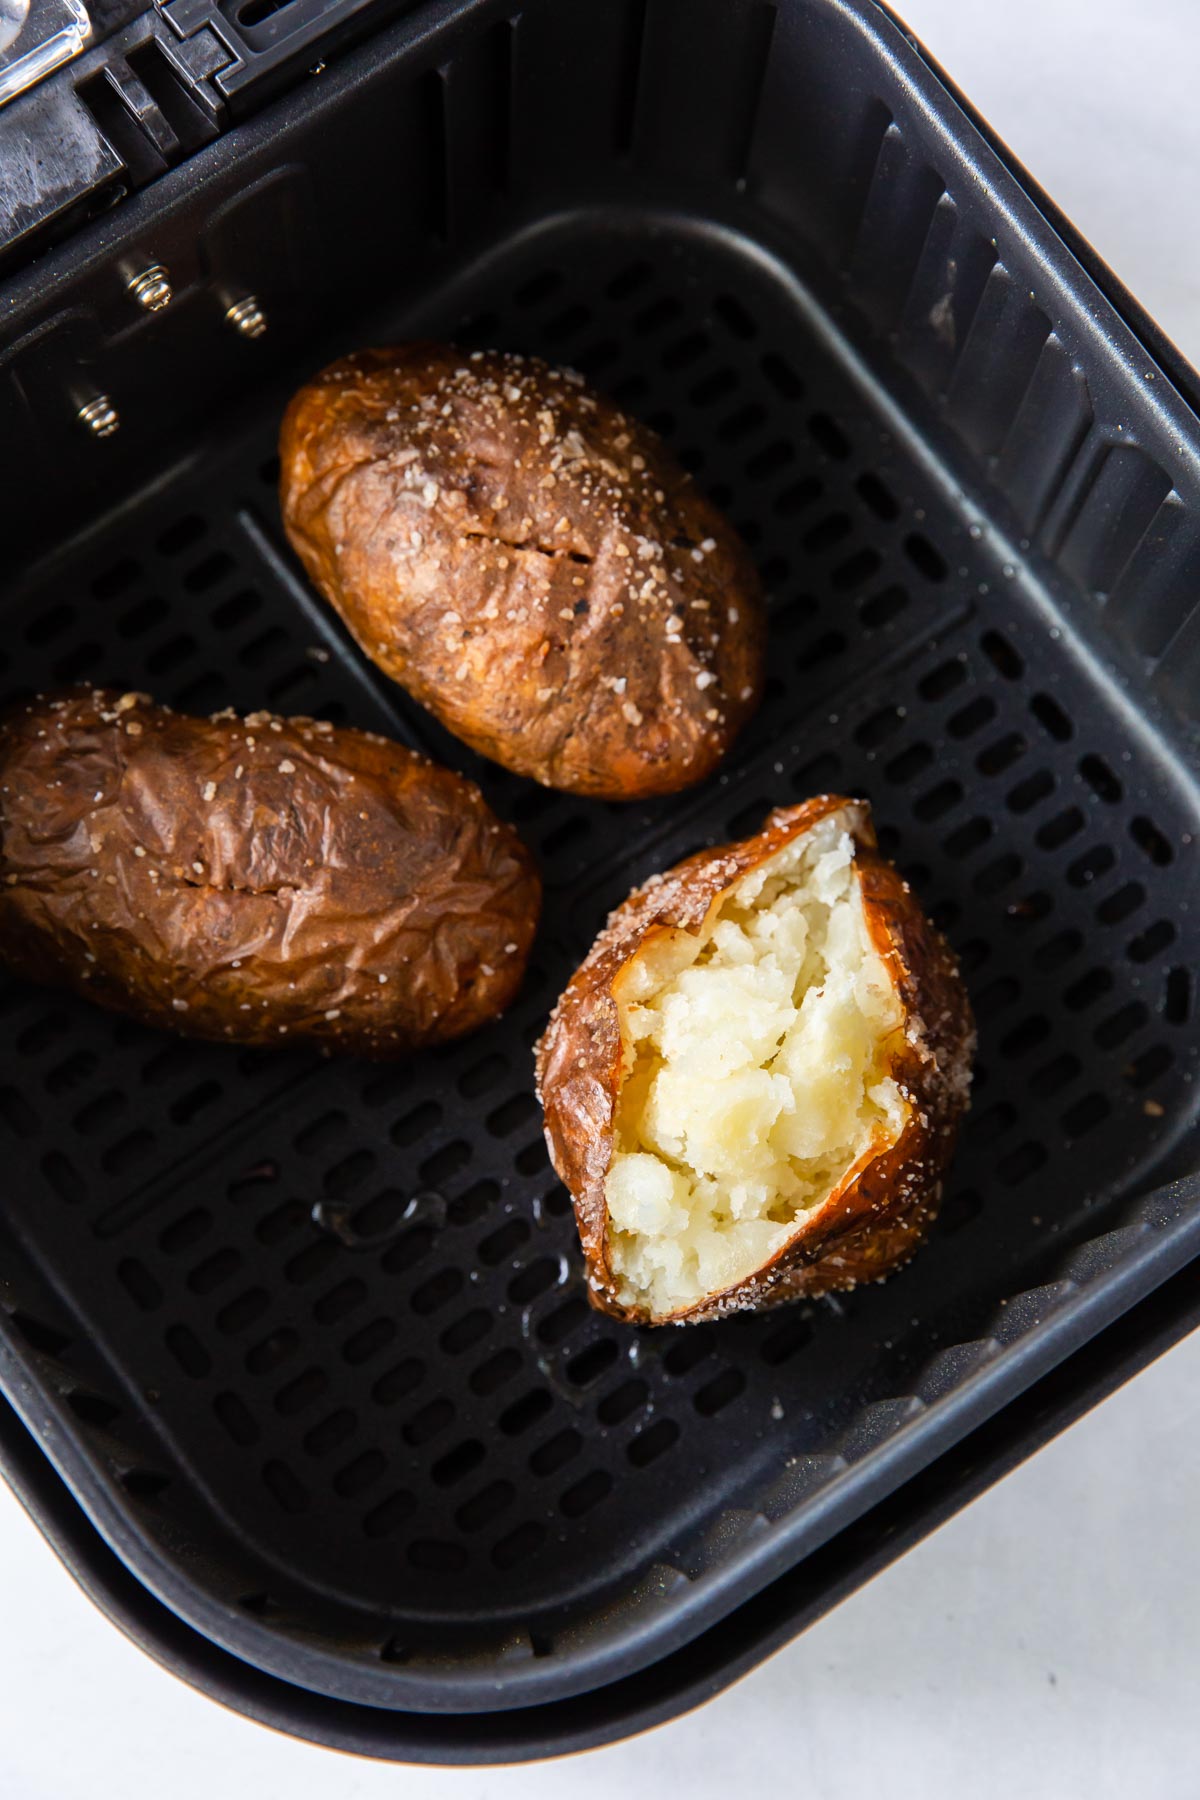 Three baked potatoes in air fryer with one potato cut open.